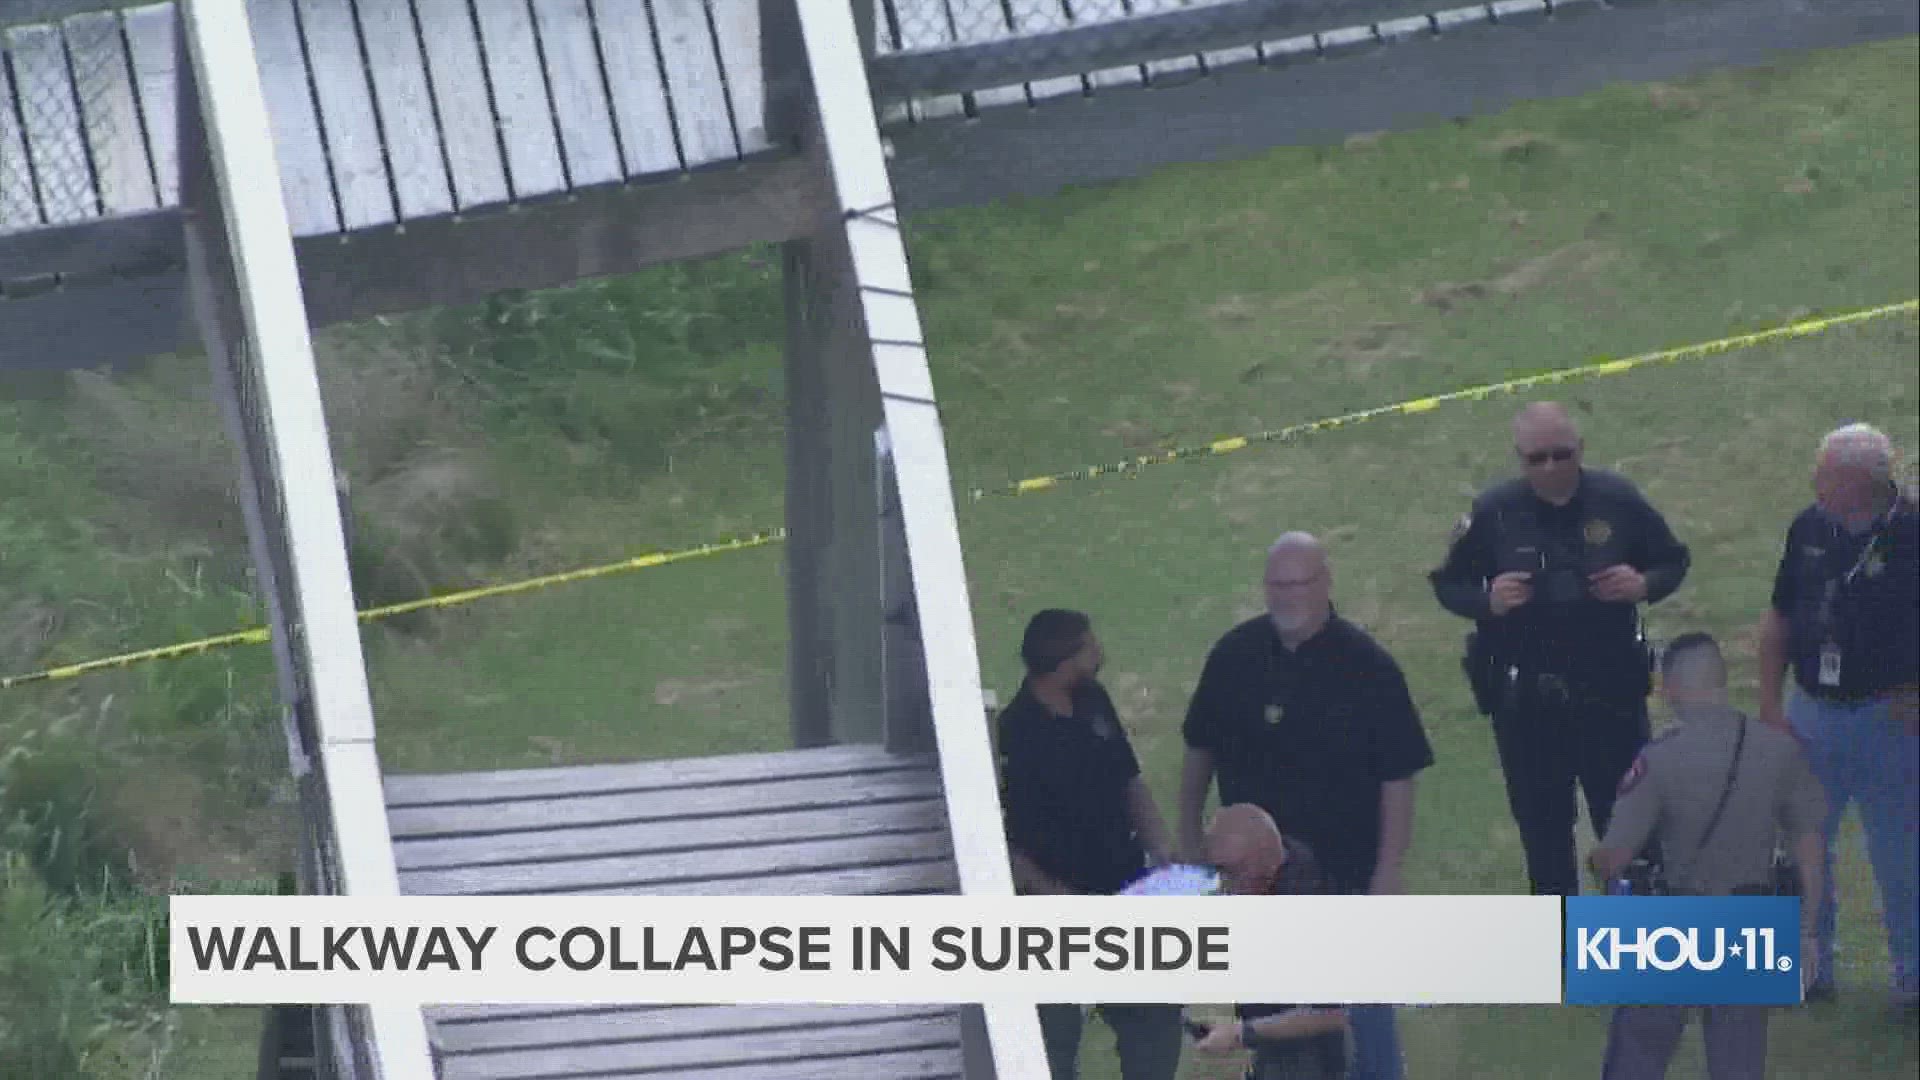 The collapse happened Thursday afternoon in Surfside Beach.